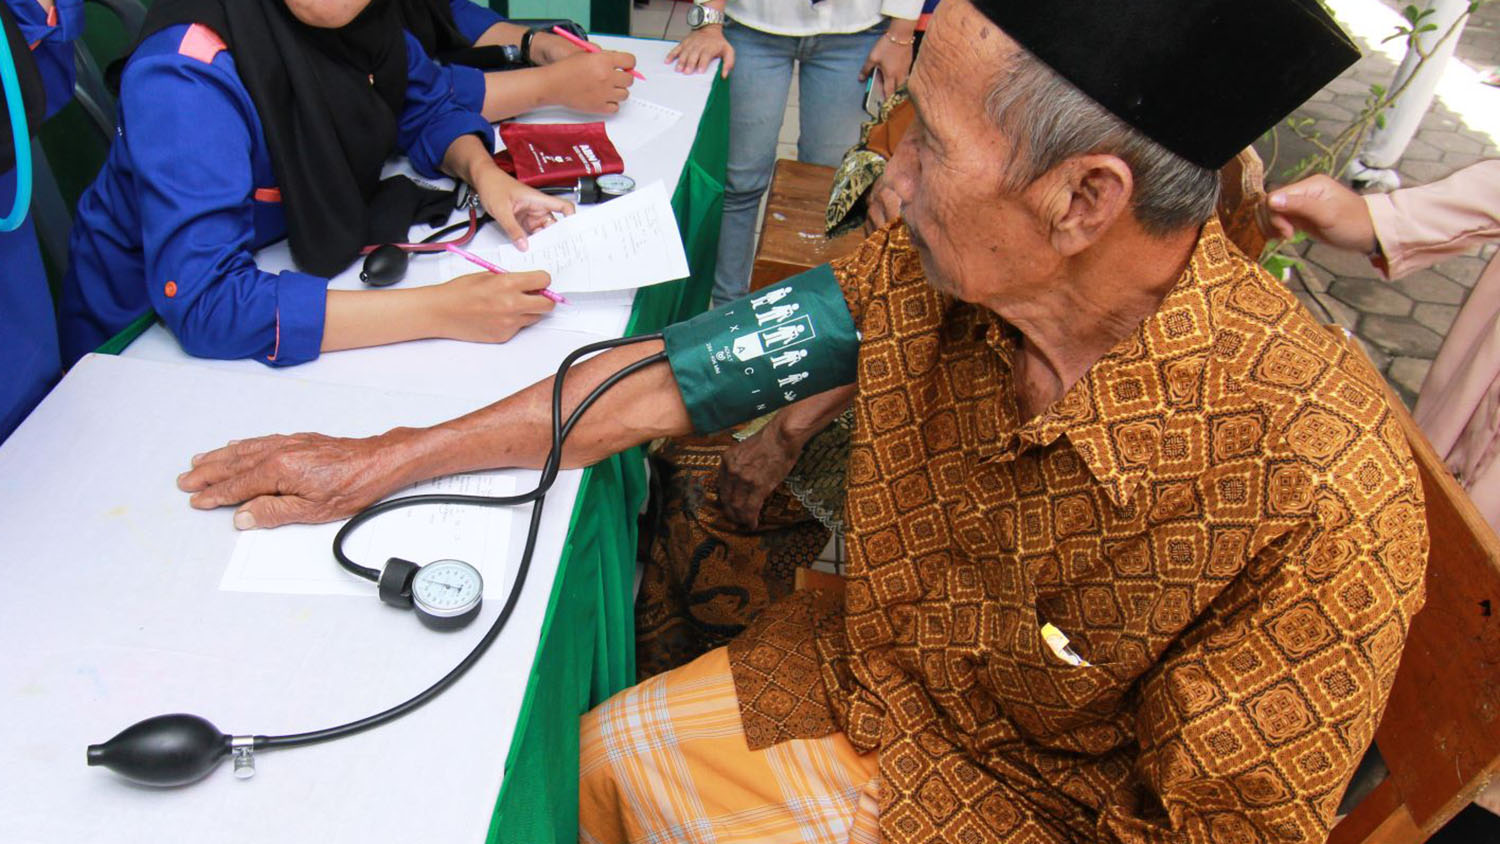  _797_https://www.helpage.org/silo/images/indonesiahealthcare_1500x844.jpg